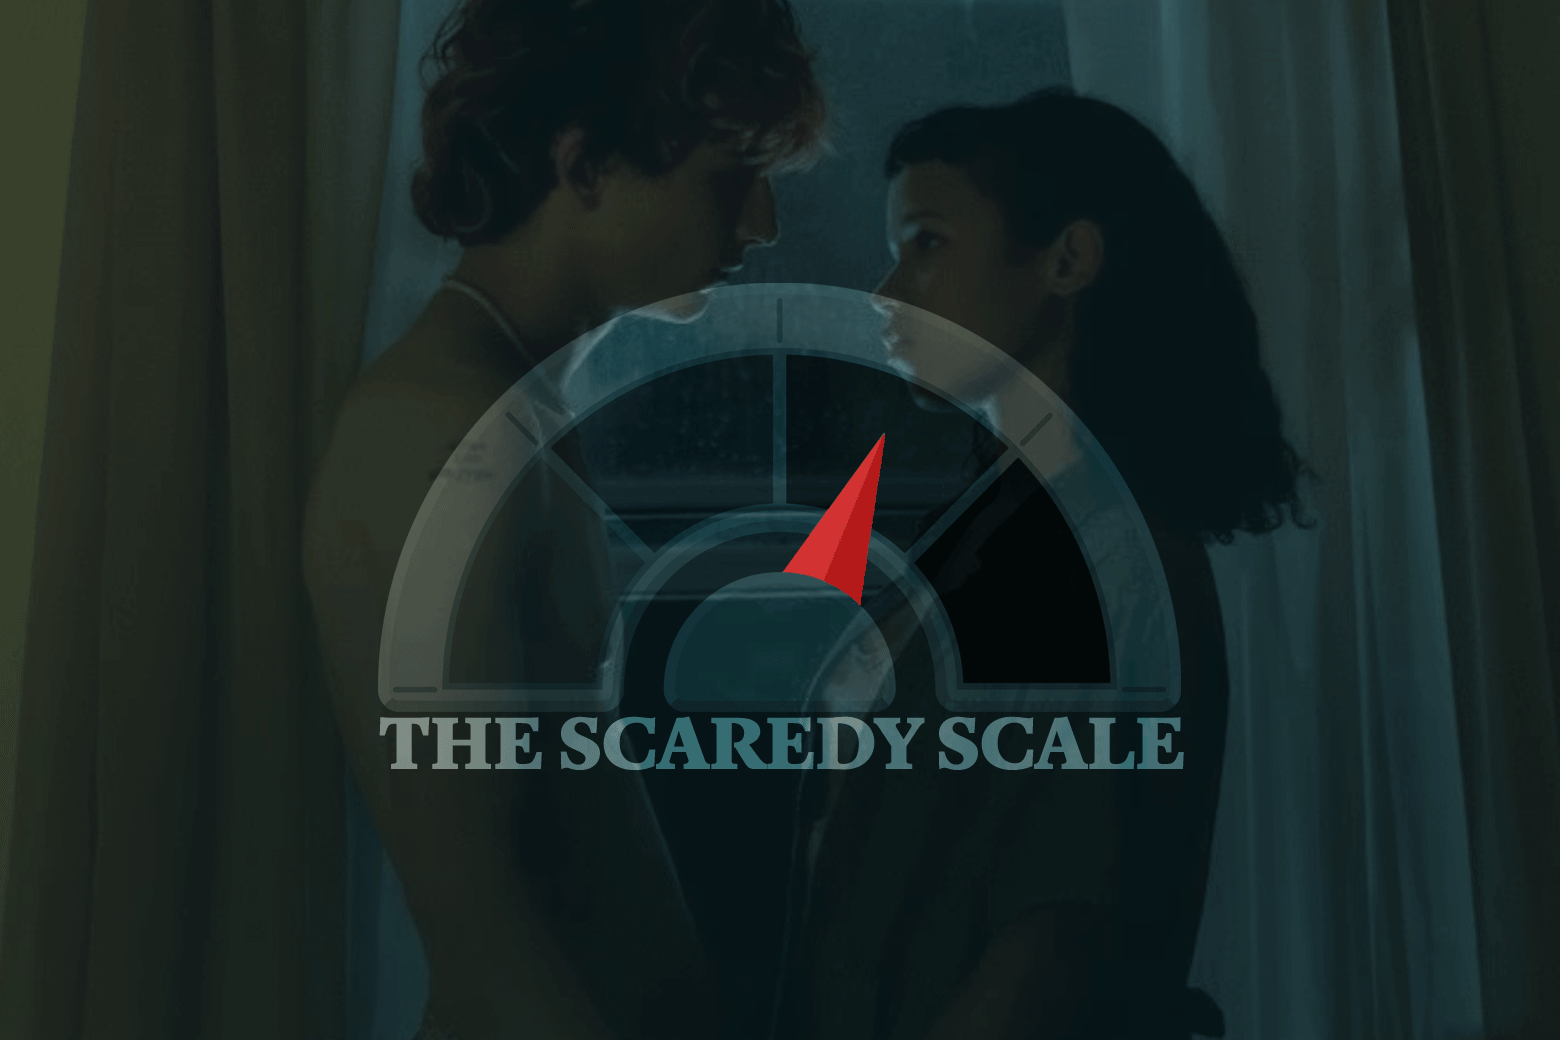 A still from Bones and All showing a shirtless Timothee Chalamet and Taylor Russell standing face to face near an open window. Over his face, an animated GIF superimposes a twitching meter and the words "The Scaredy Scale."